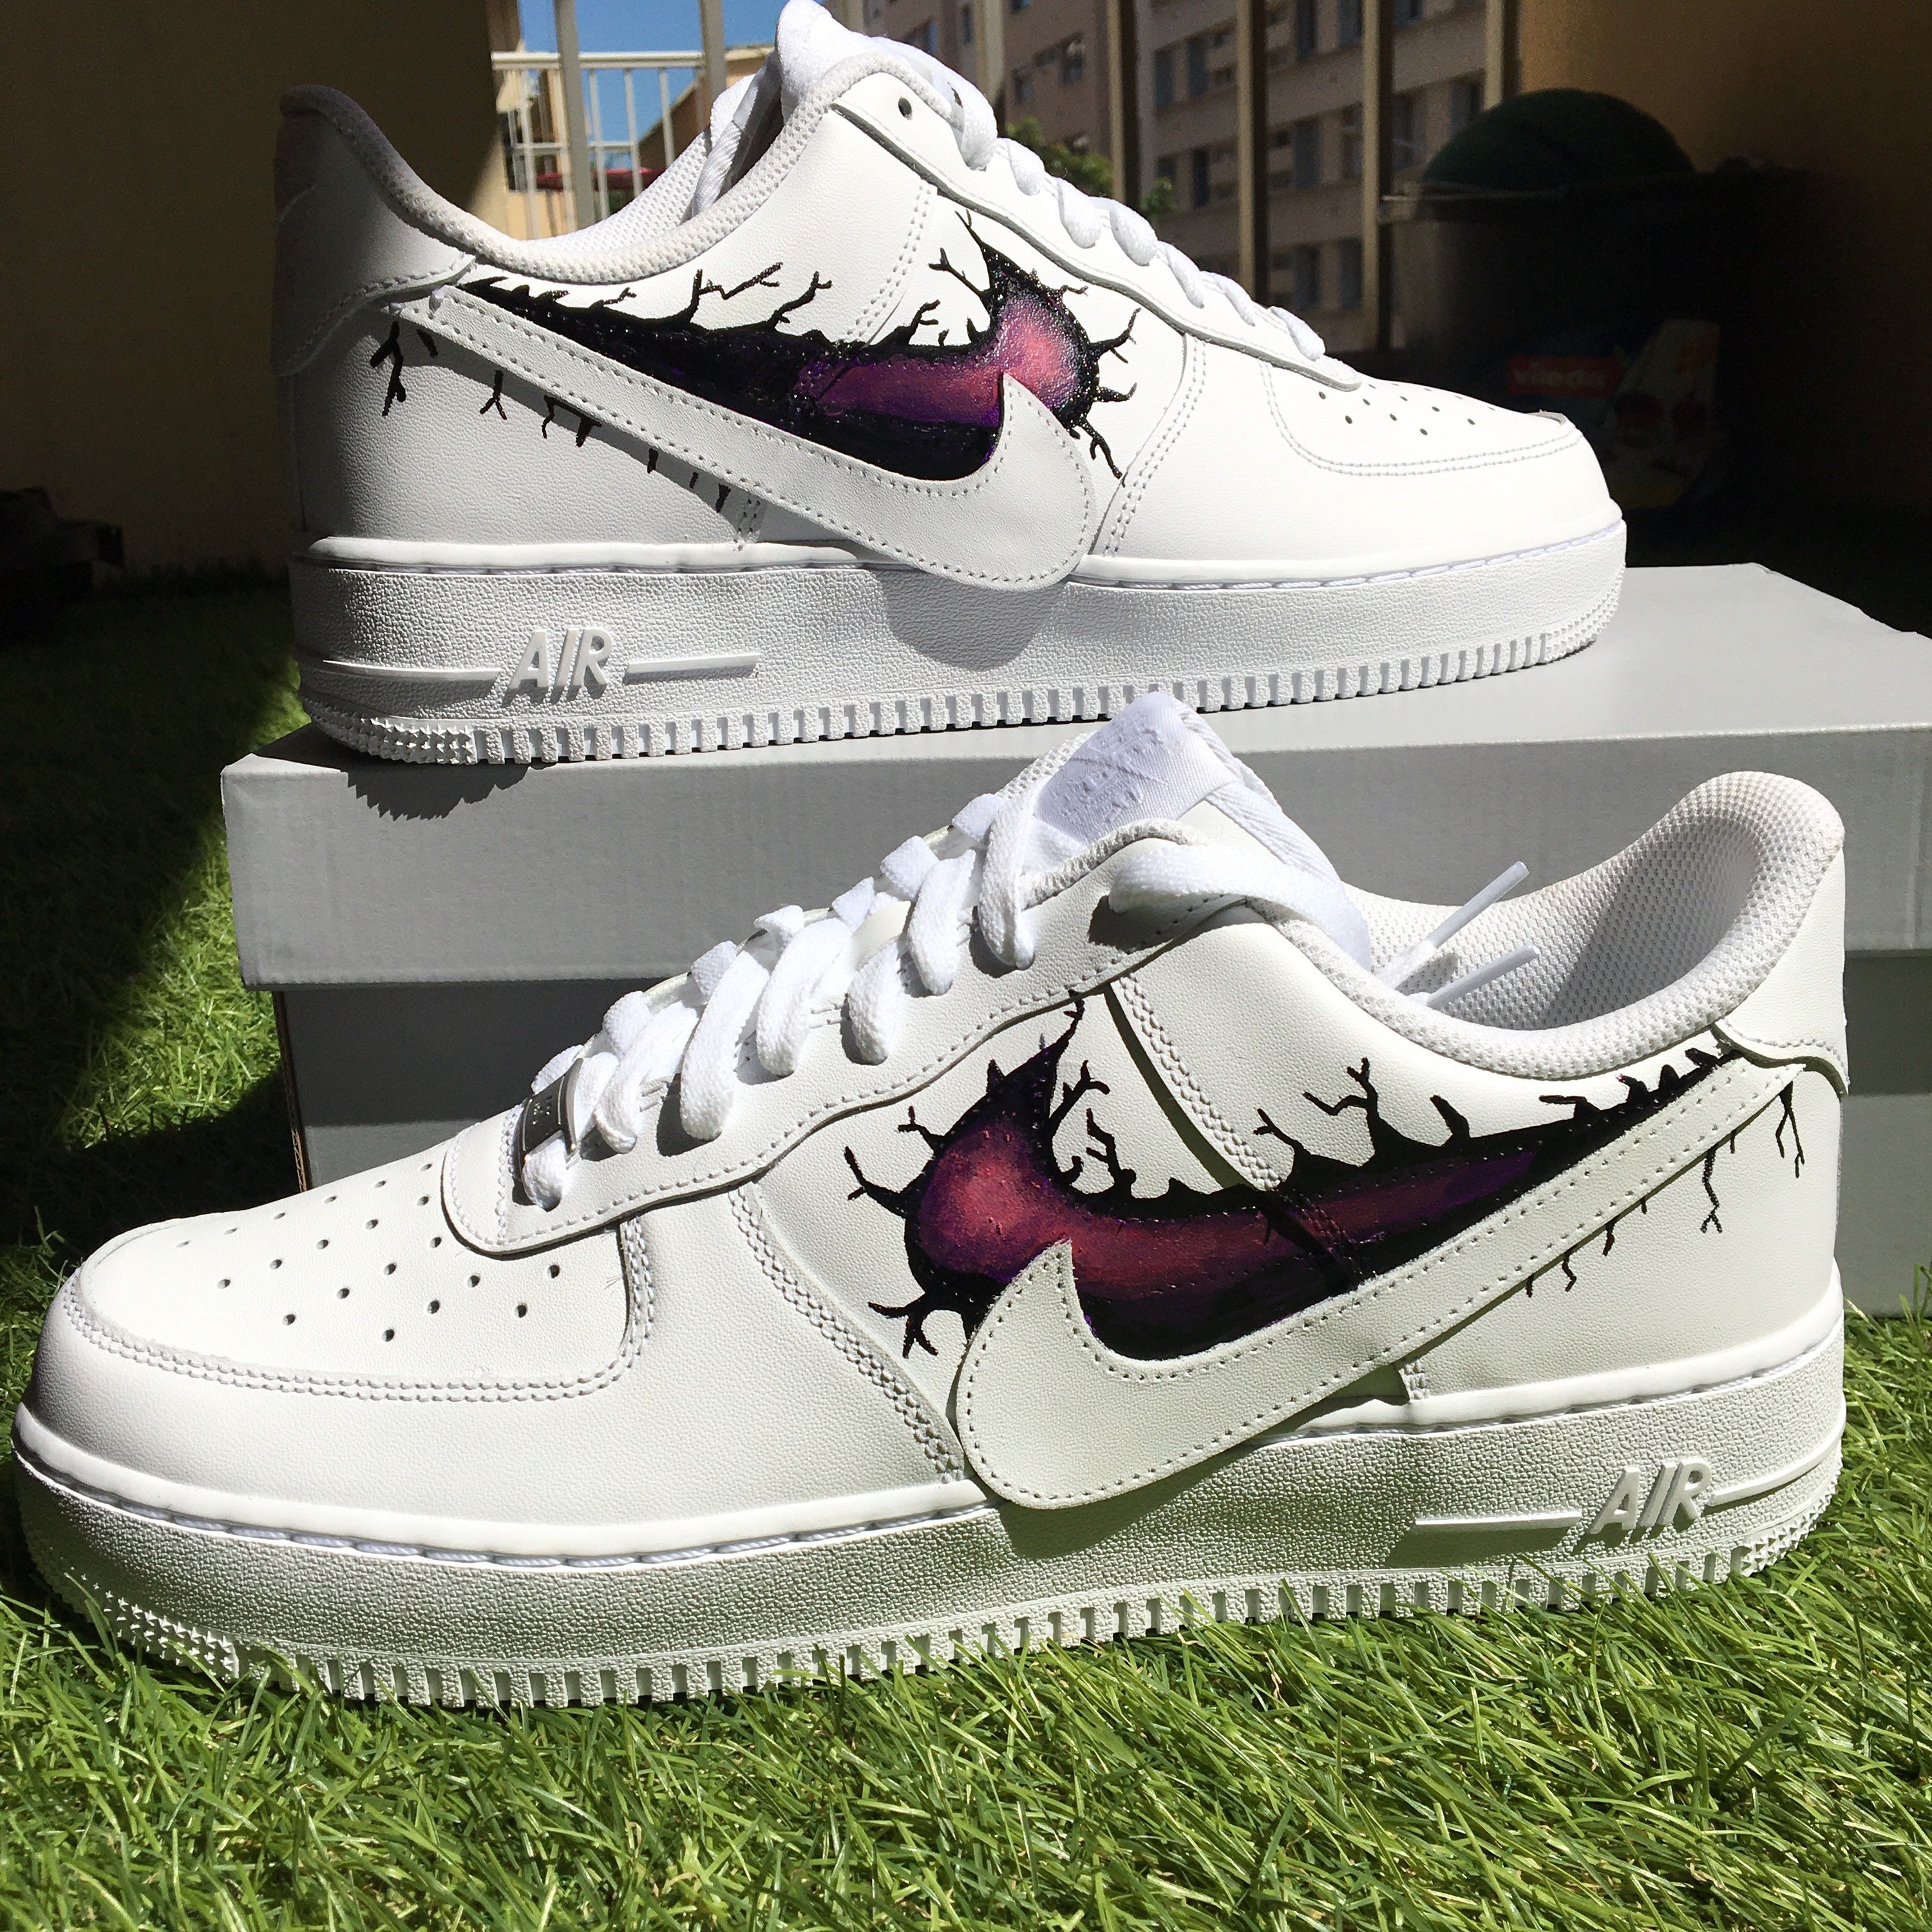 Gucci Air Force 1 - Etsy